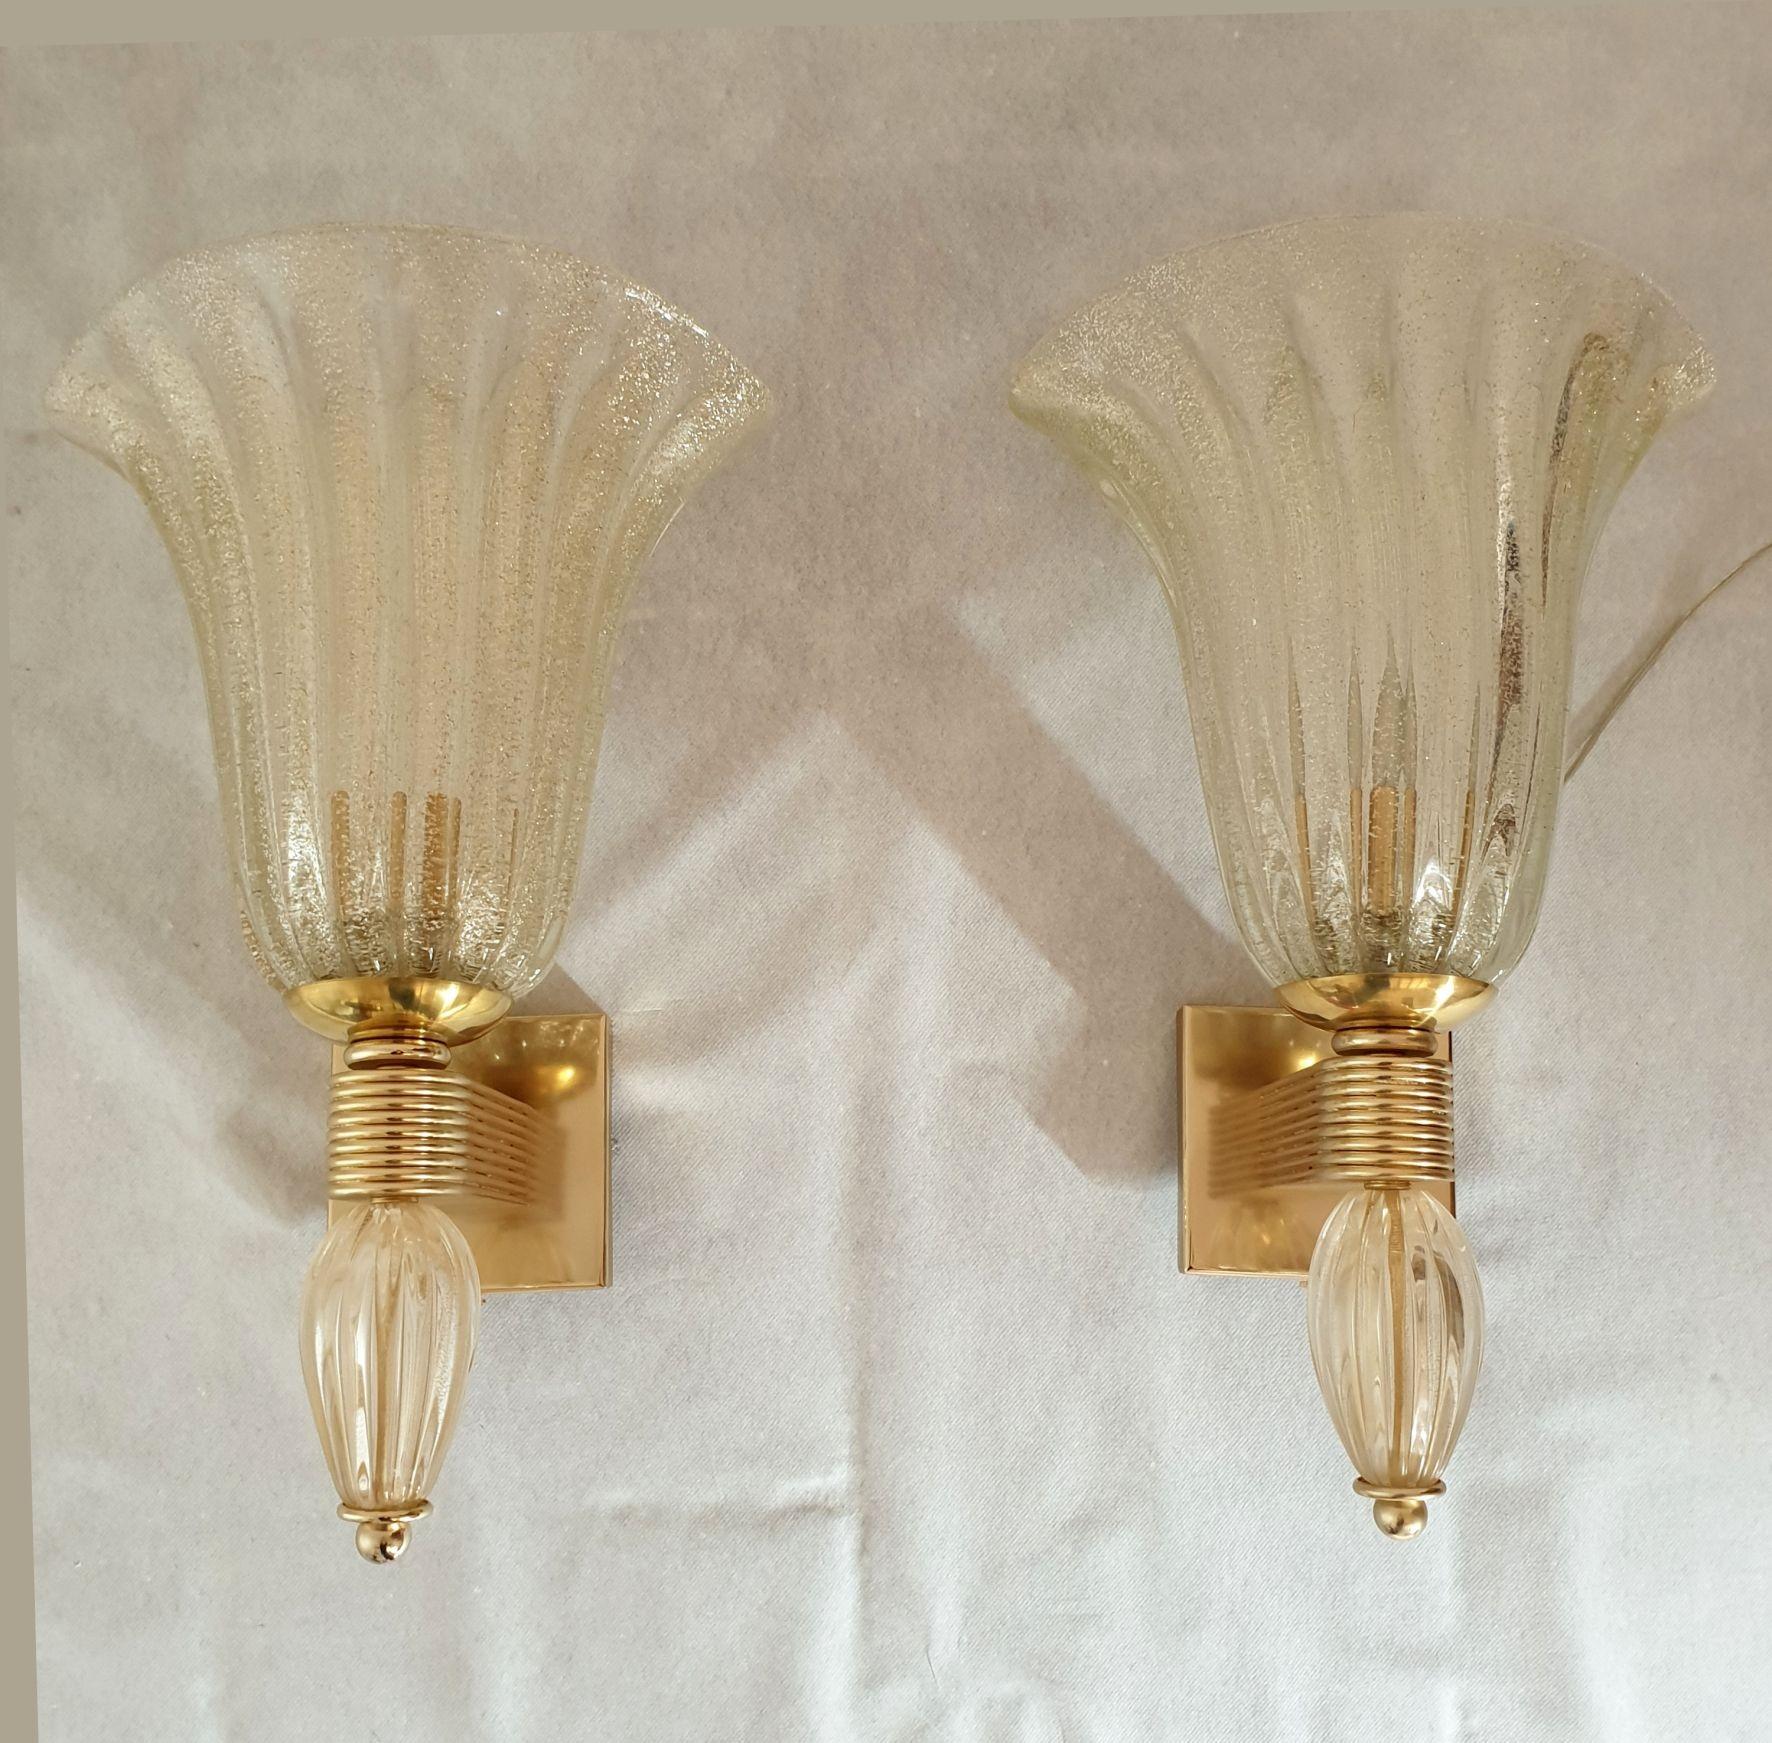 Pair of large Neoclassical style Murano glass sconces, attributed to Barovier & Toso, Italy 1970s.
The Mid-Century sconces are made of hand blown clear and thick Murano glass, with real gold flakes.
The gold flakes inside the Murano glass create a